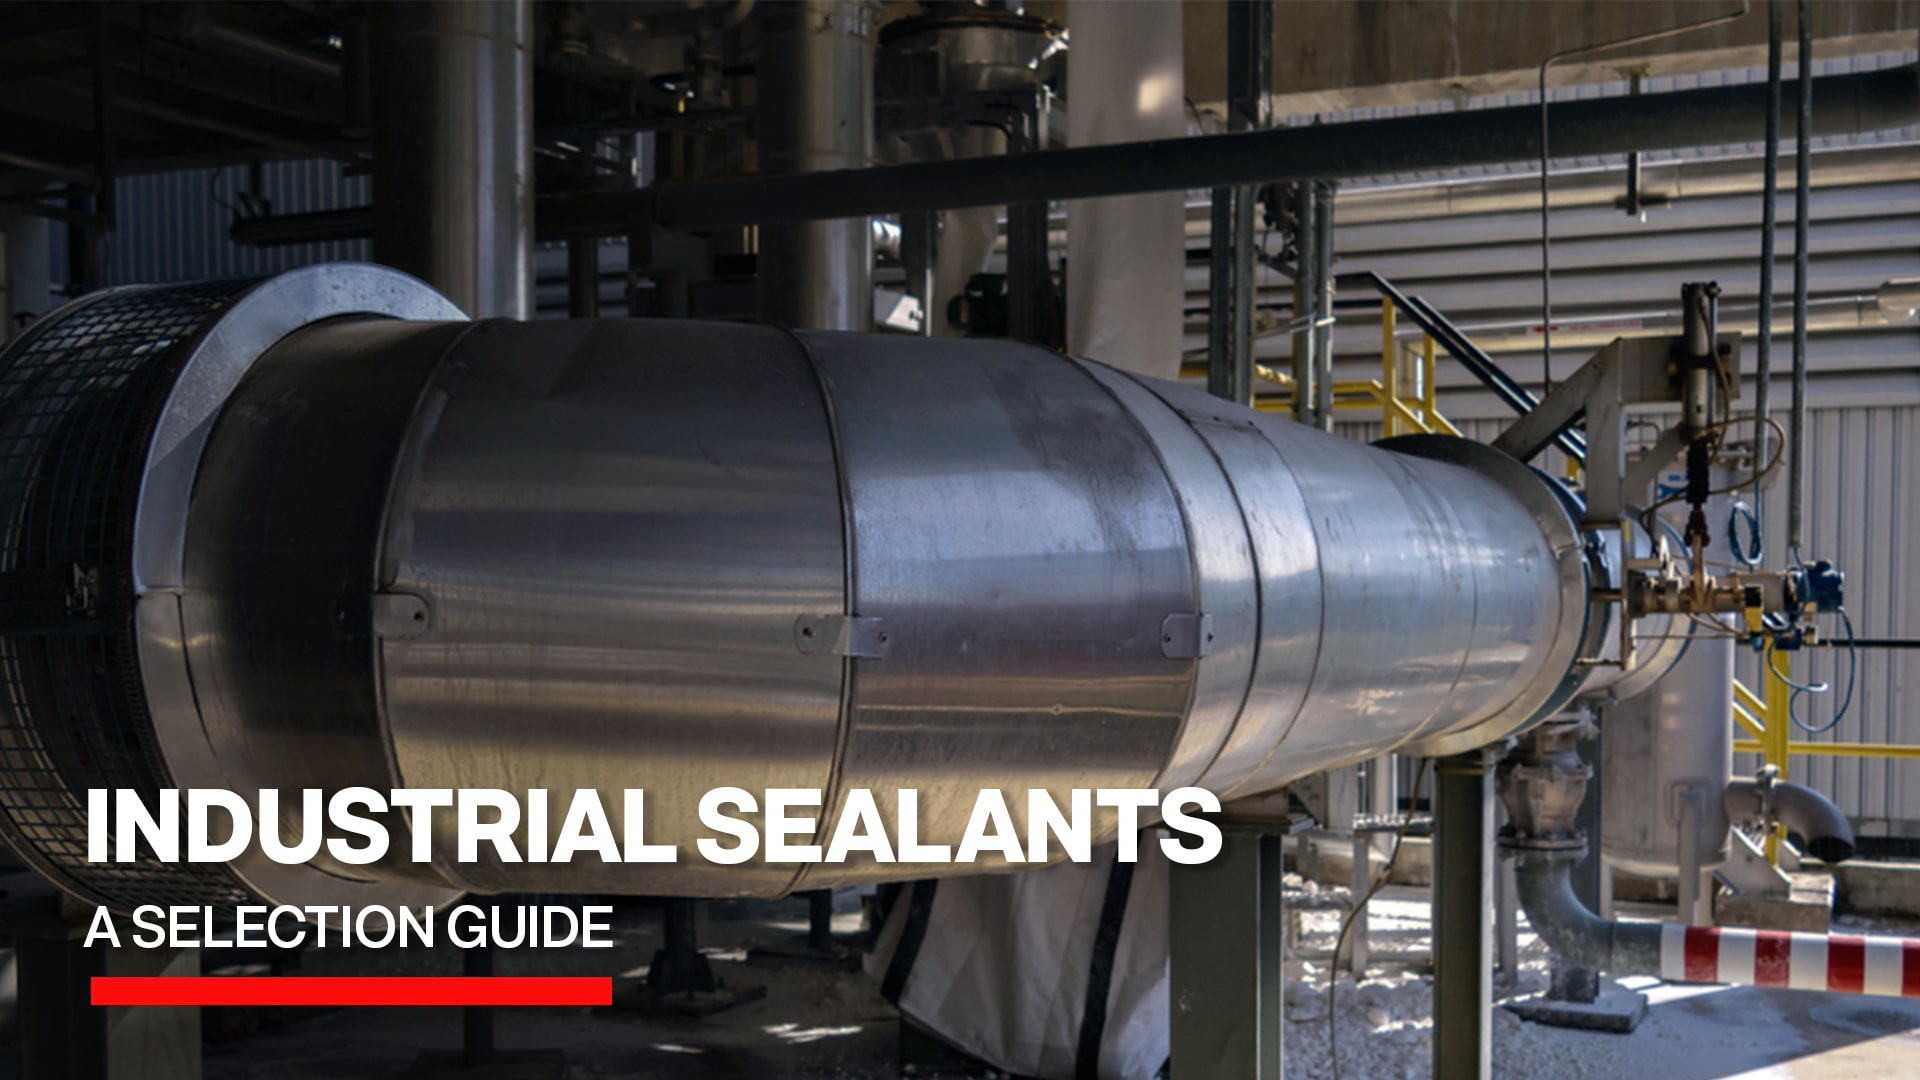 Industrial Sealants: A Selection Guide